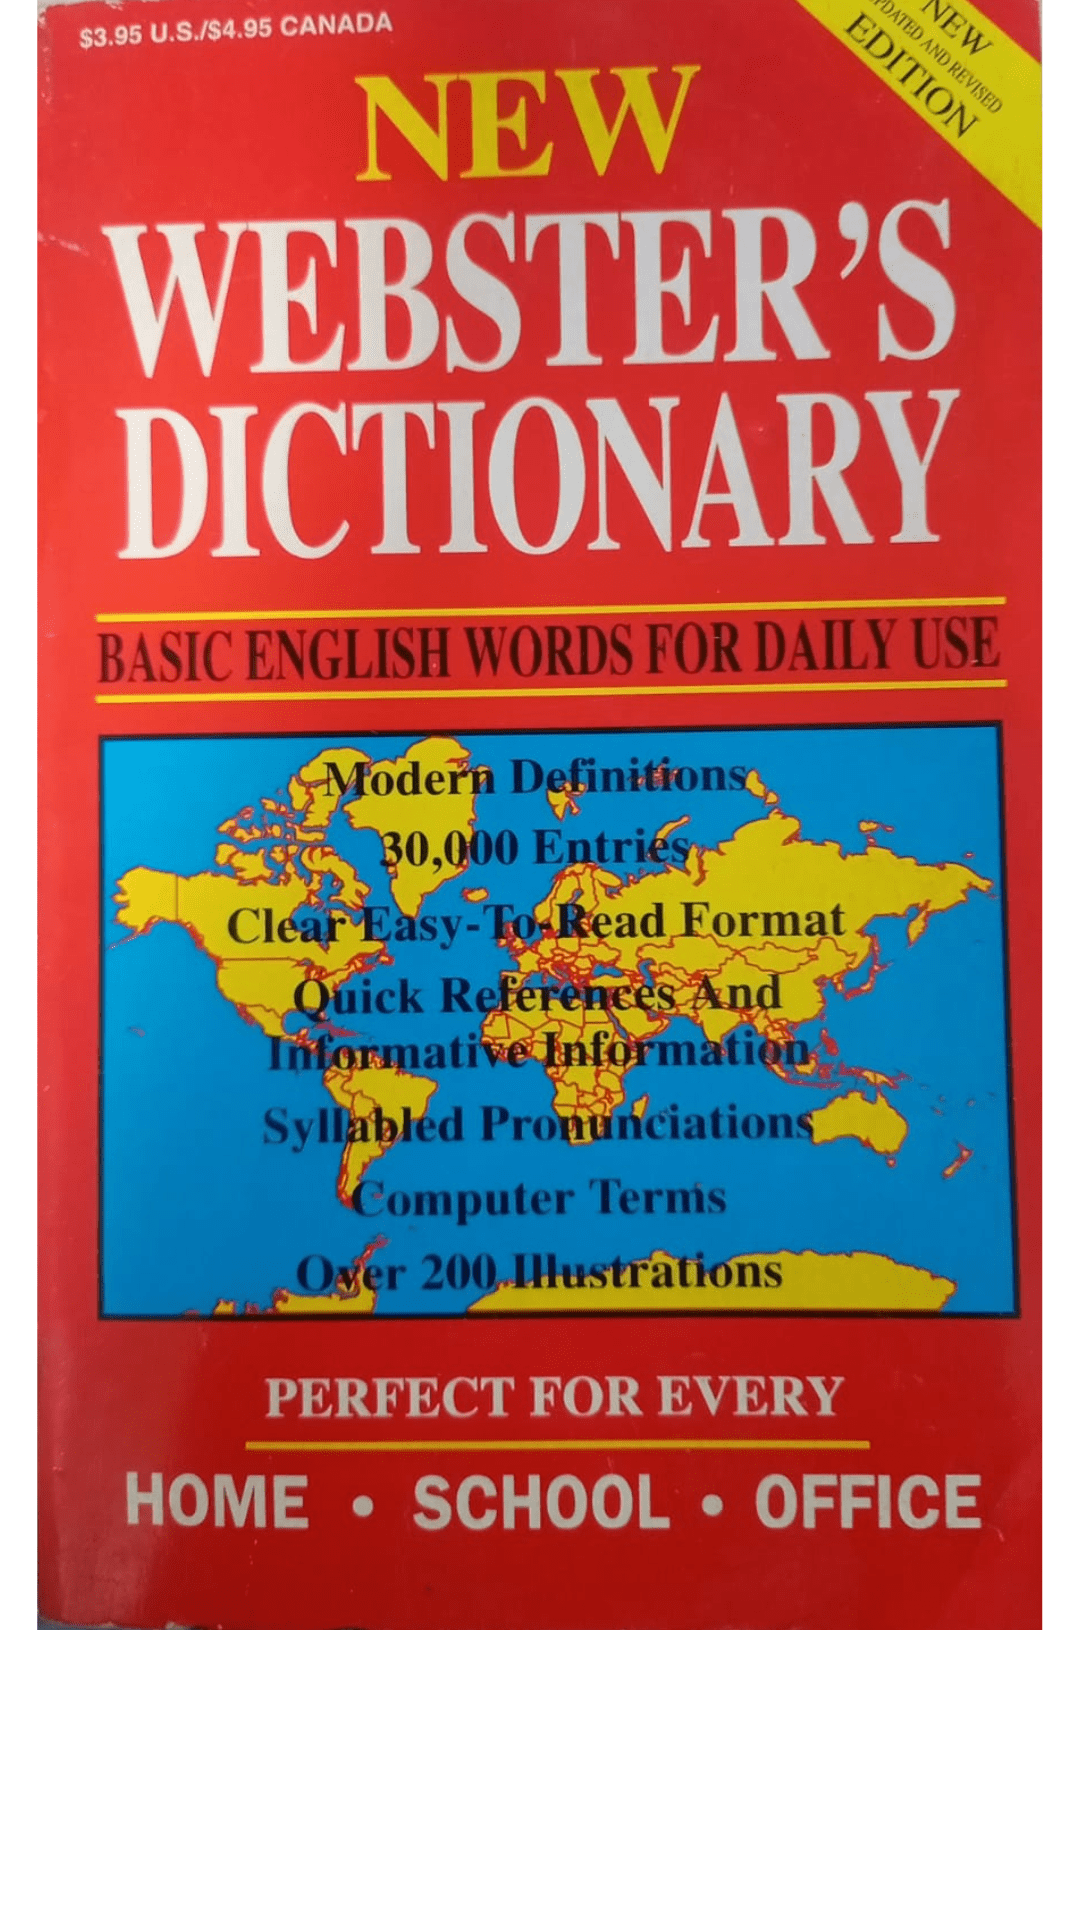 NEW WEBSTER'S DICTIONARY - BASIC ENGLISH WORDS FOR DAILY USE